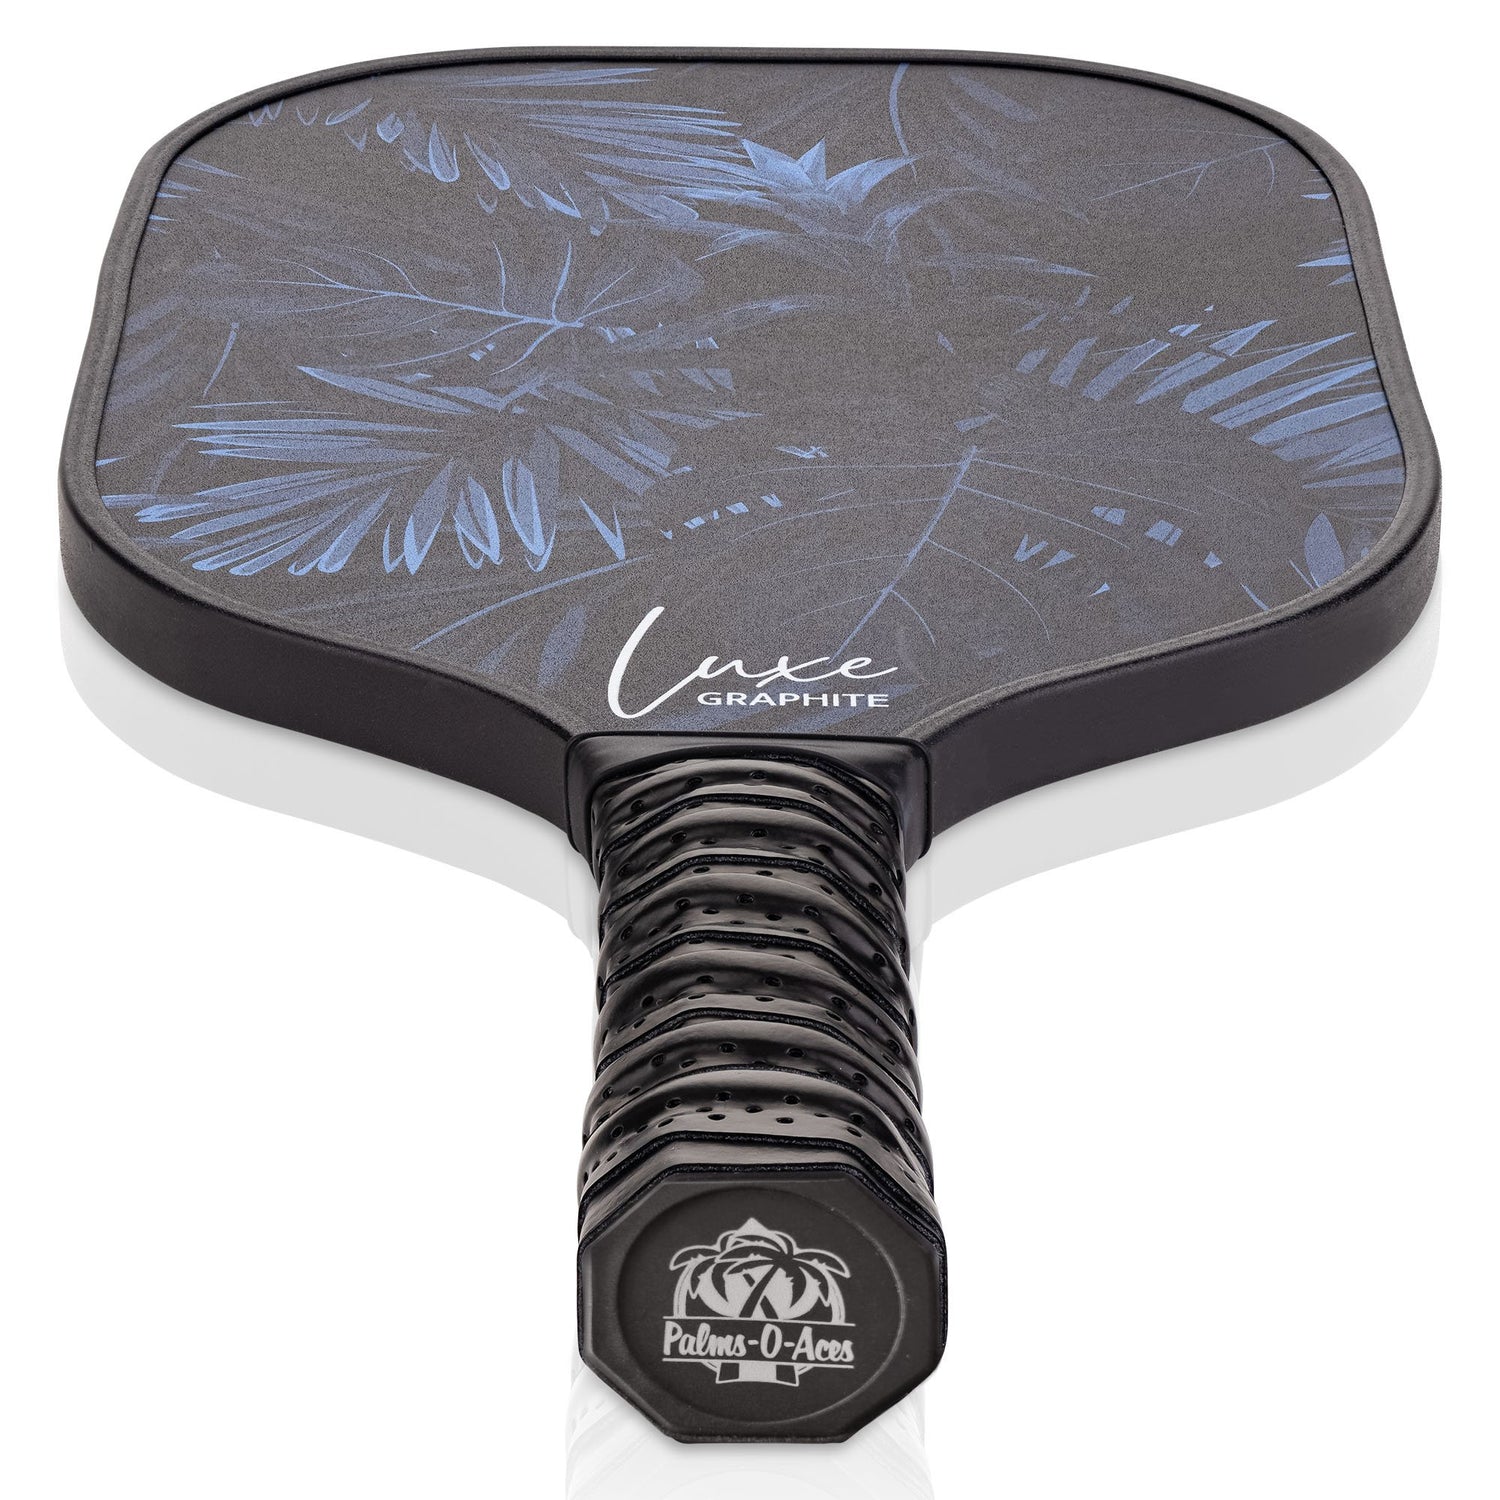 Midnight Palms Luxe Graphite Pickleball Paddle with Cover - Palms-O-Aces